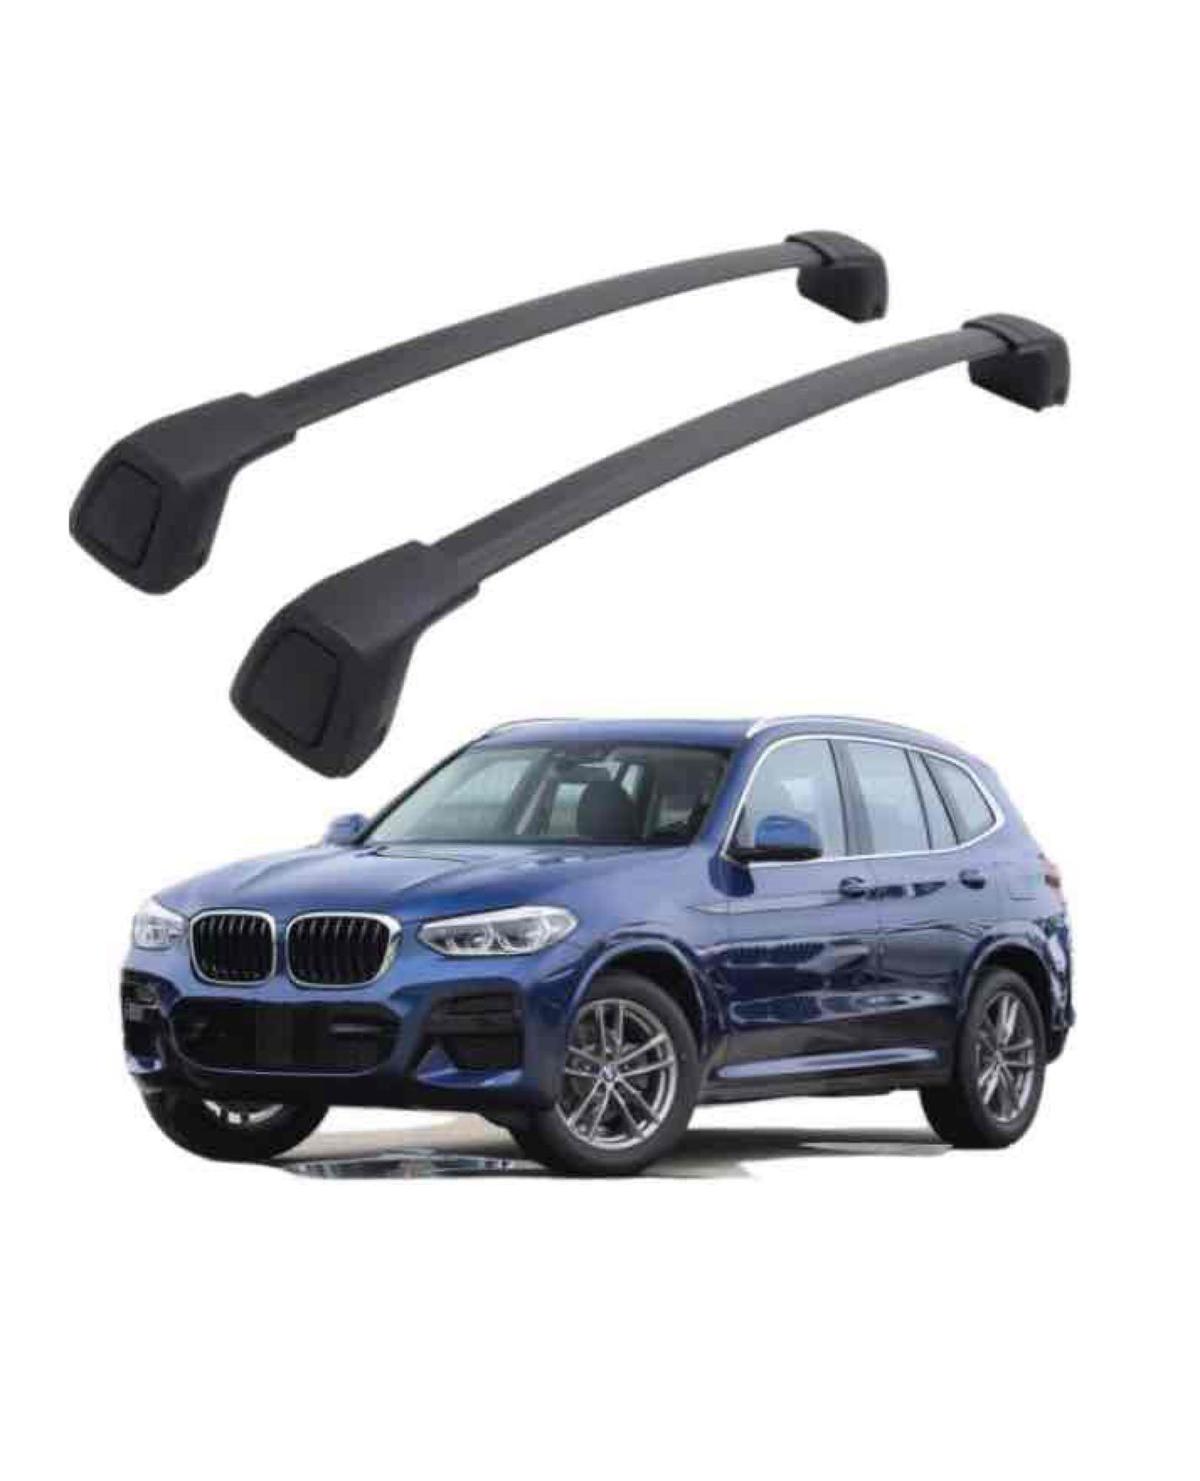 Cross Bars Fit for BMW X3 2019 2020 2021 2022 2023 2024